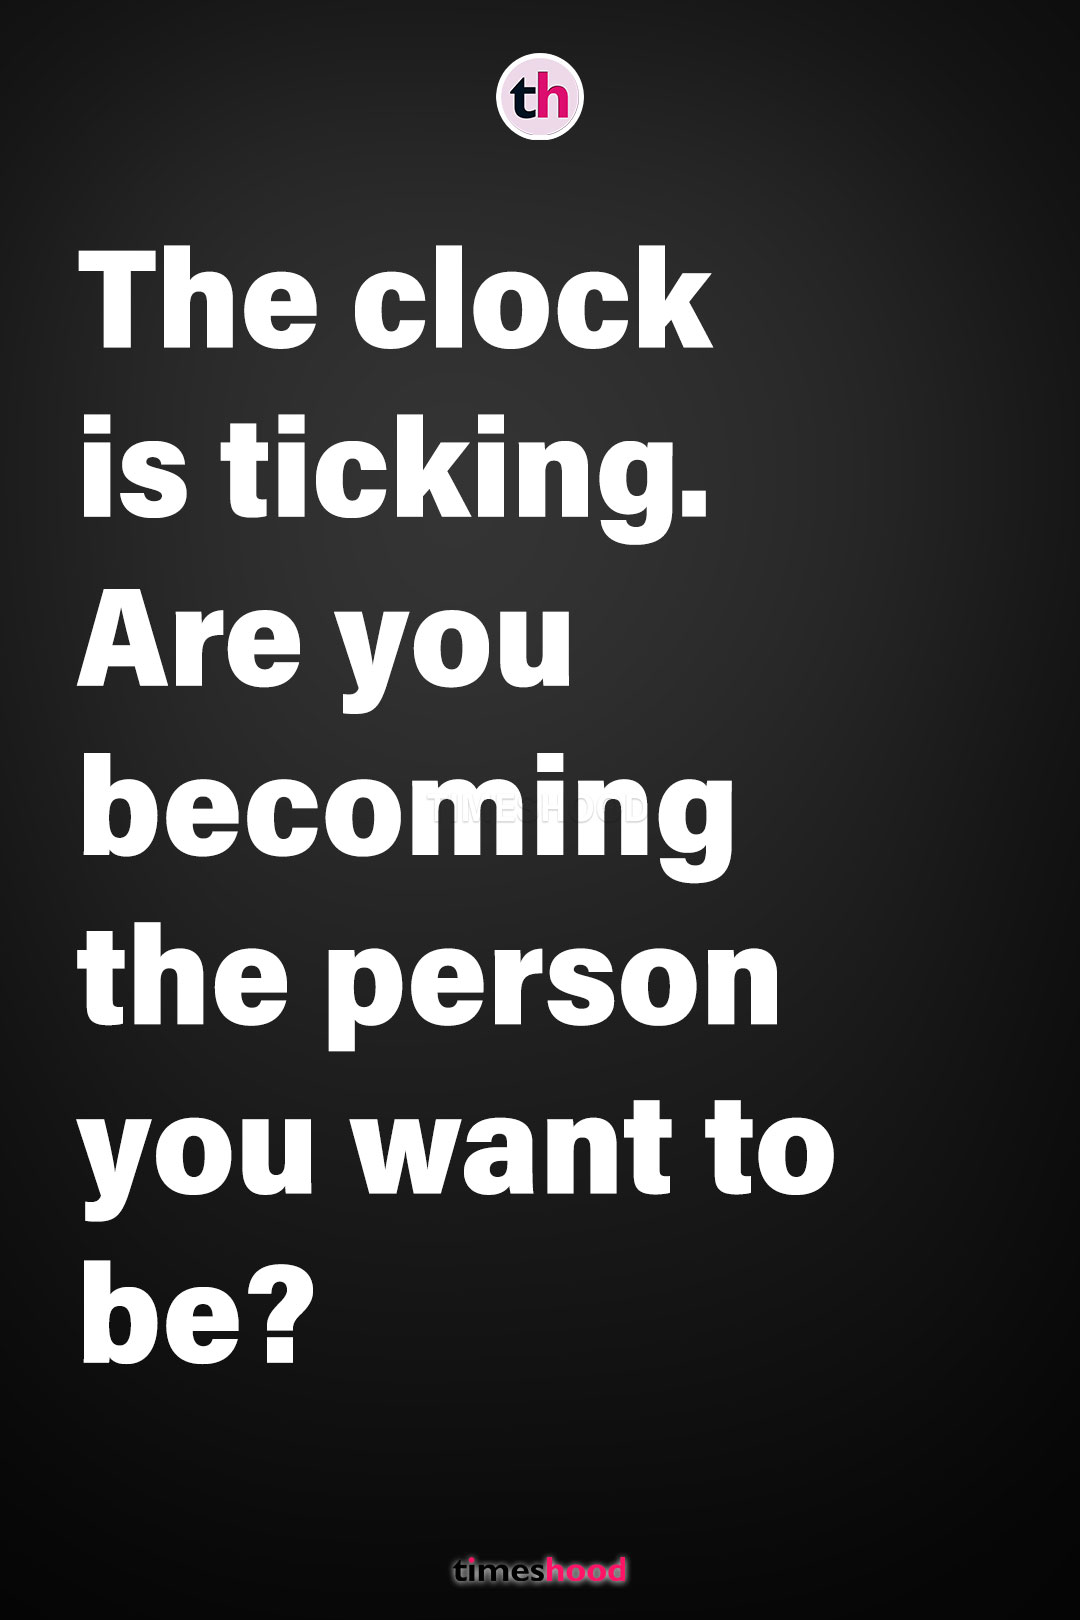 The clock is ticking - Motivational Fitness Quotes